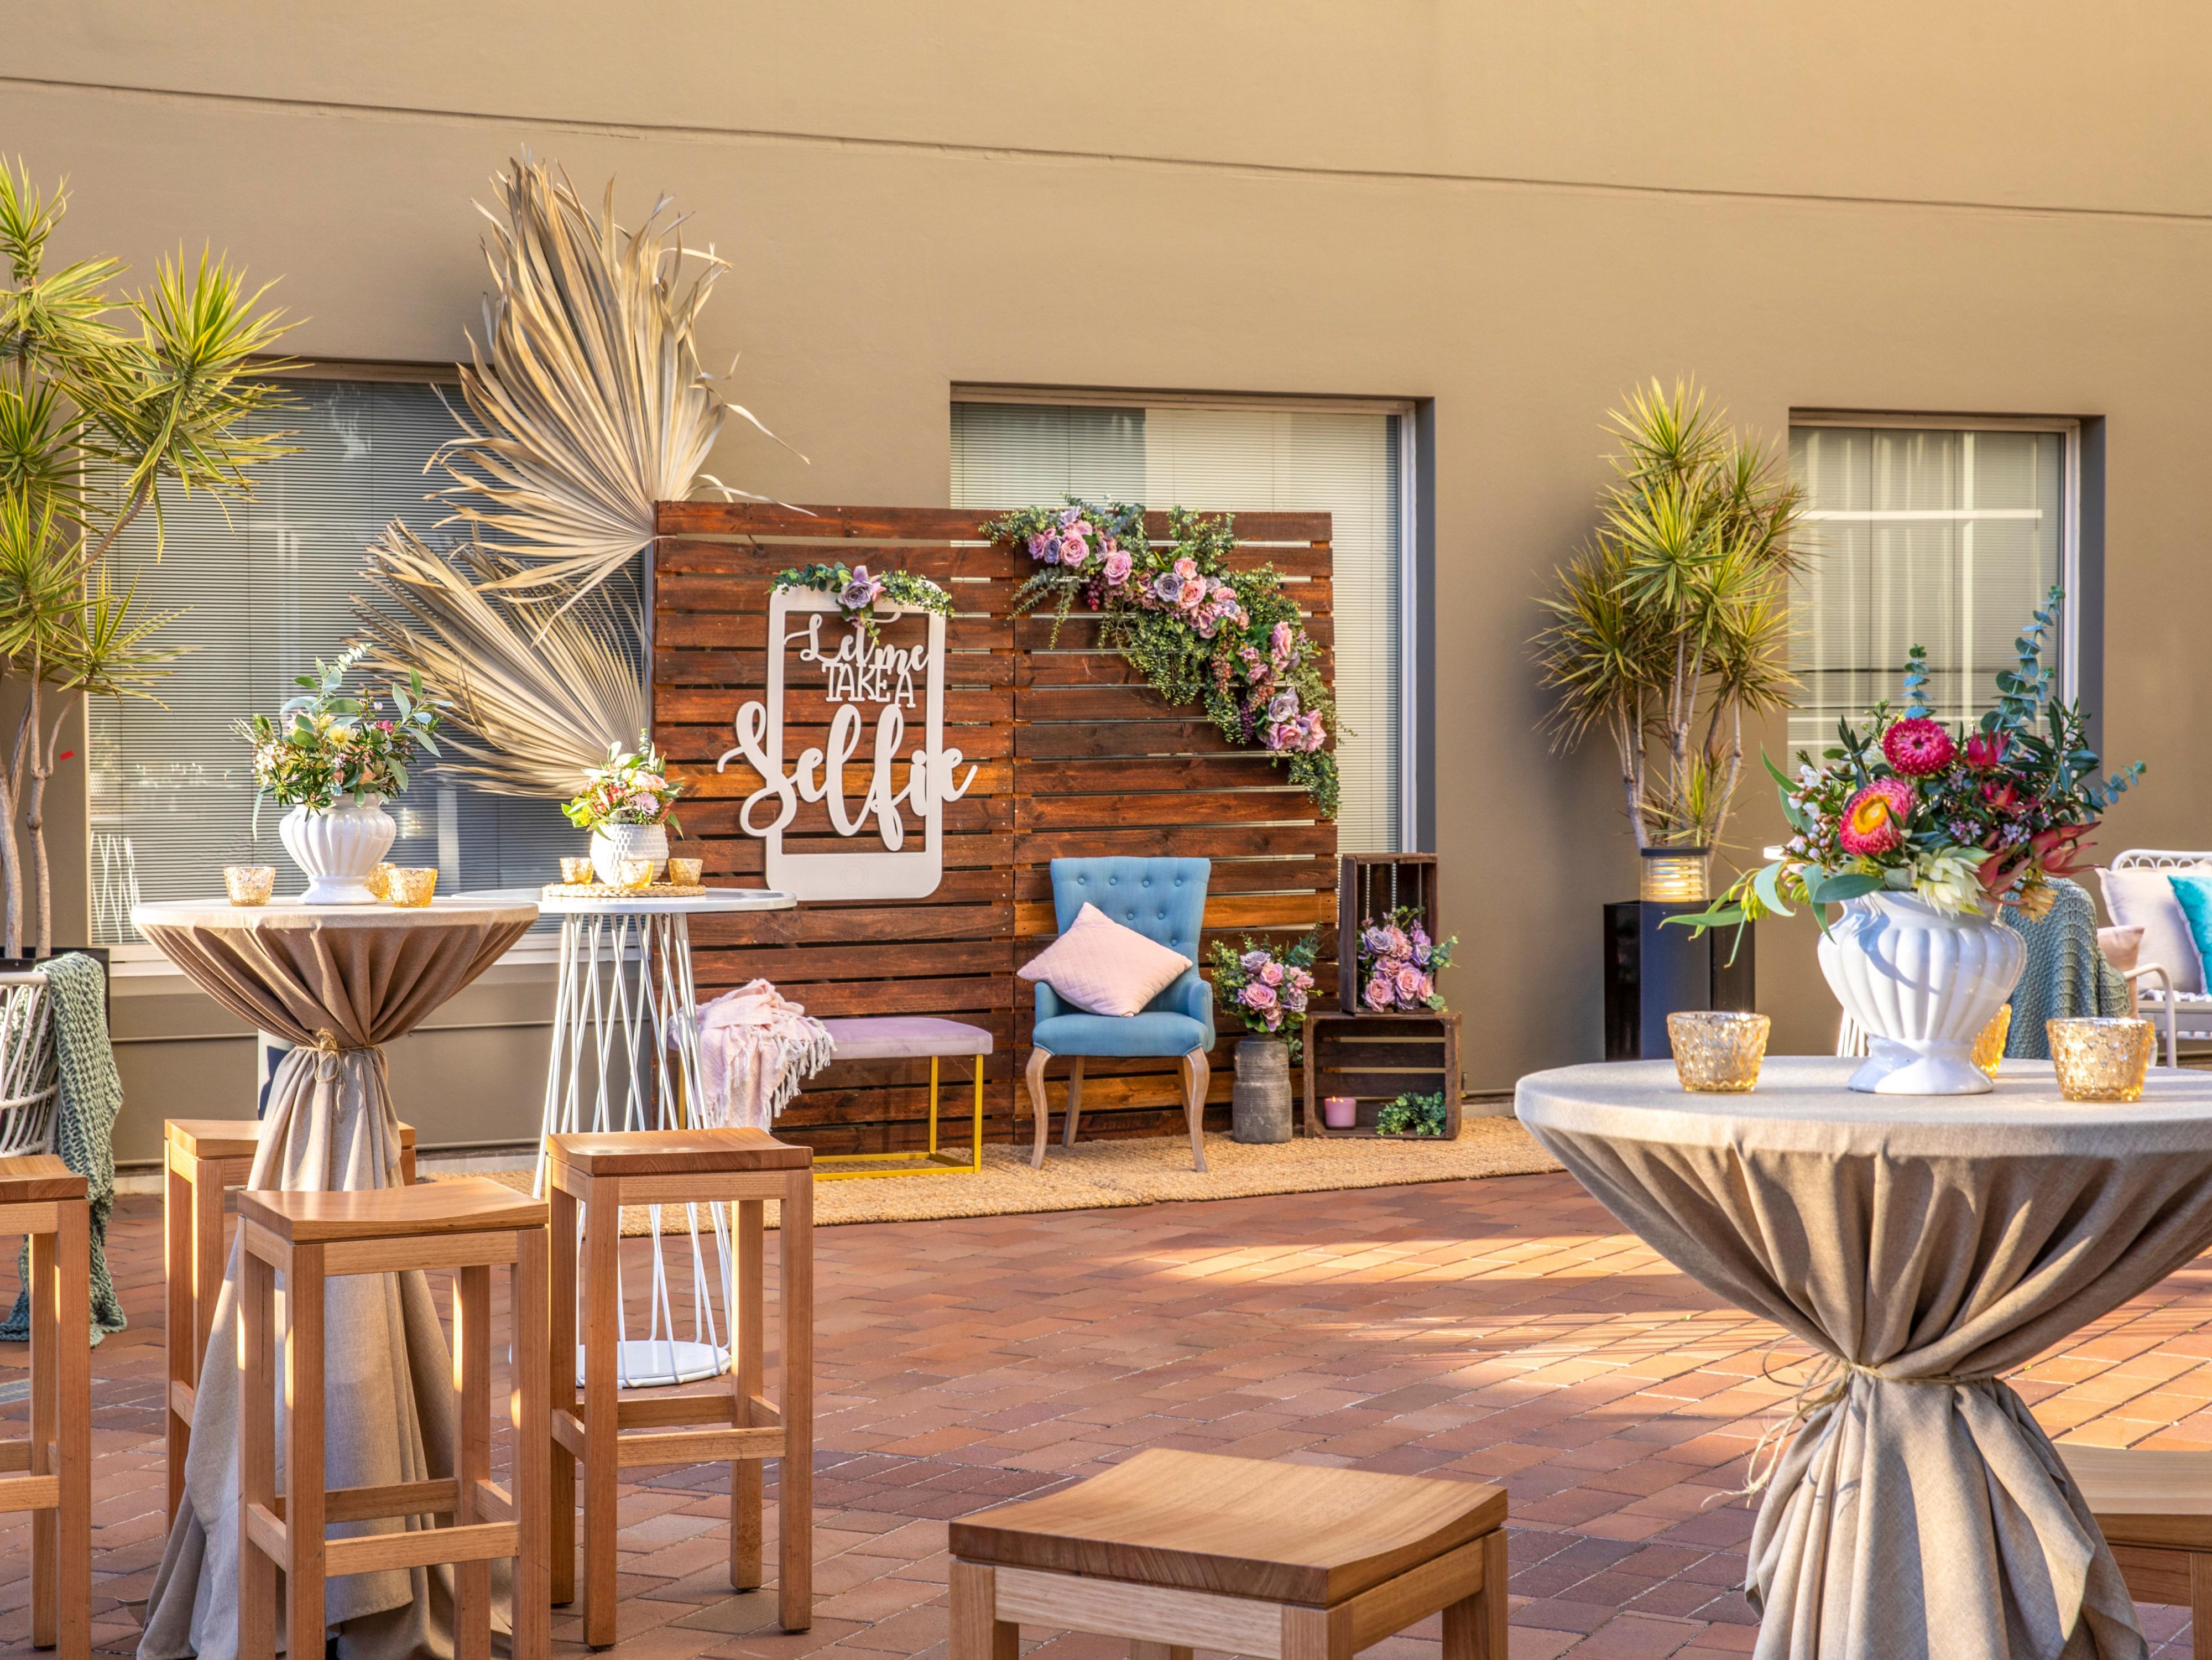 We actively support groups and meetings organisers to address the needs of each group. With 2 outdoor terraces, we cater to all event types. We have Sydney’s largest inner-city terrace. With views of our picturesque local neighbourhood and out towards the city, this space can be exclusively hired.